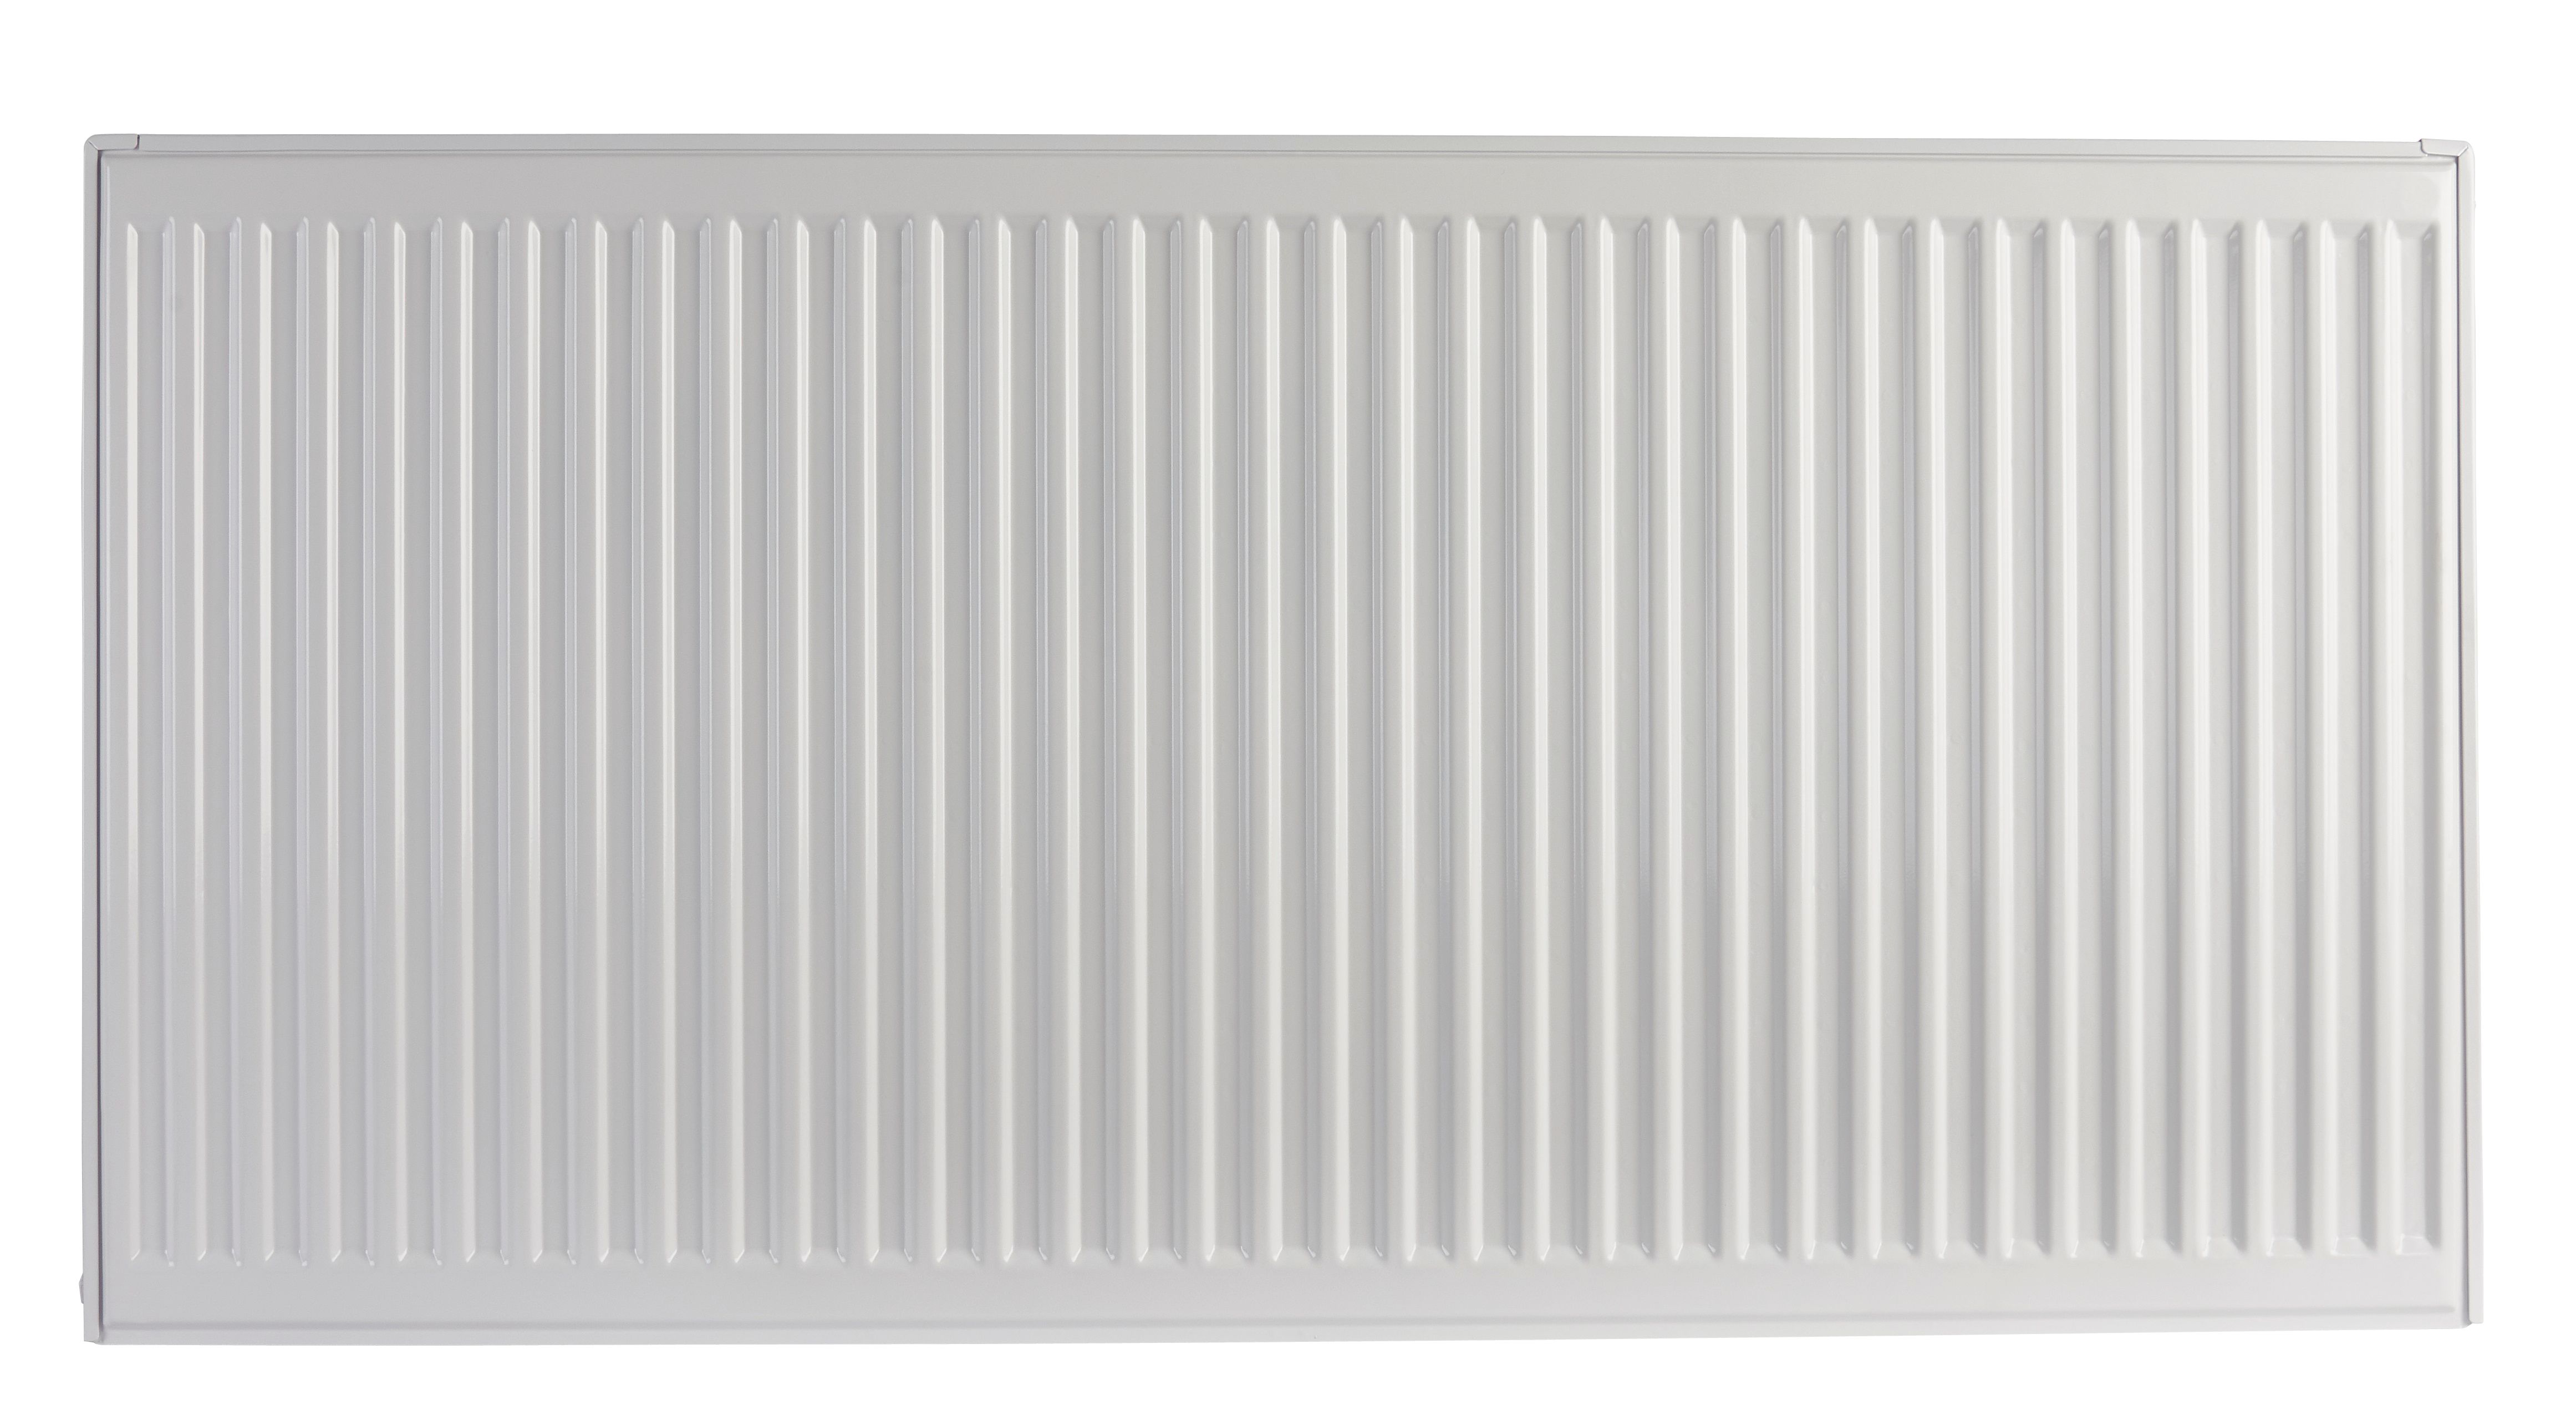 Image of Homeline by Stelrad 500 x 700mm Type 22 Double Panel Premium Double Convector Radiator